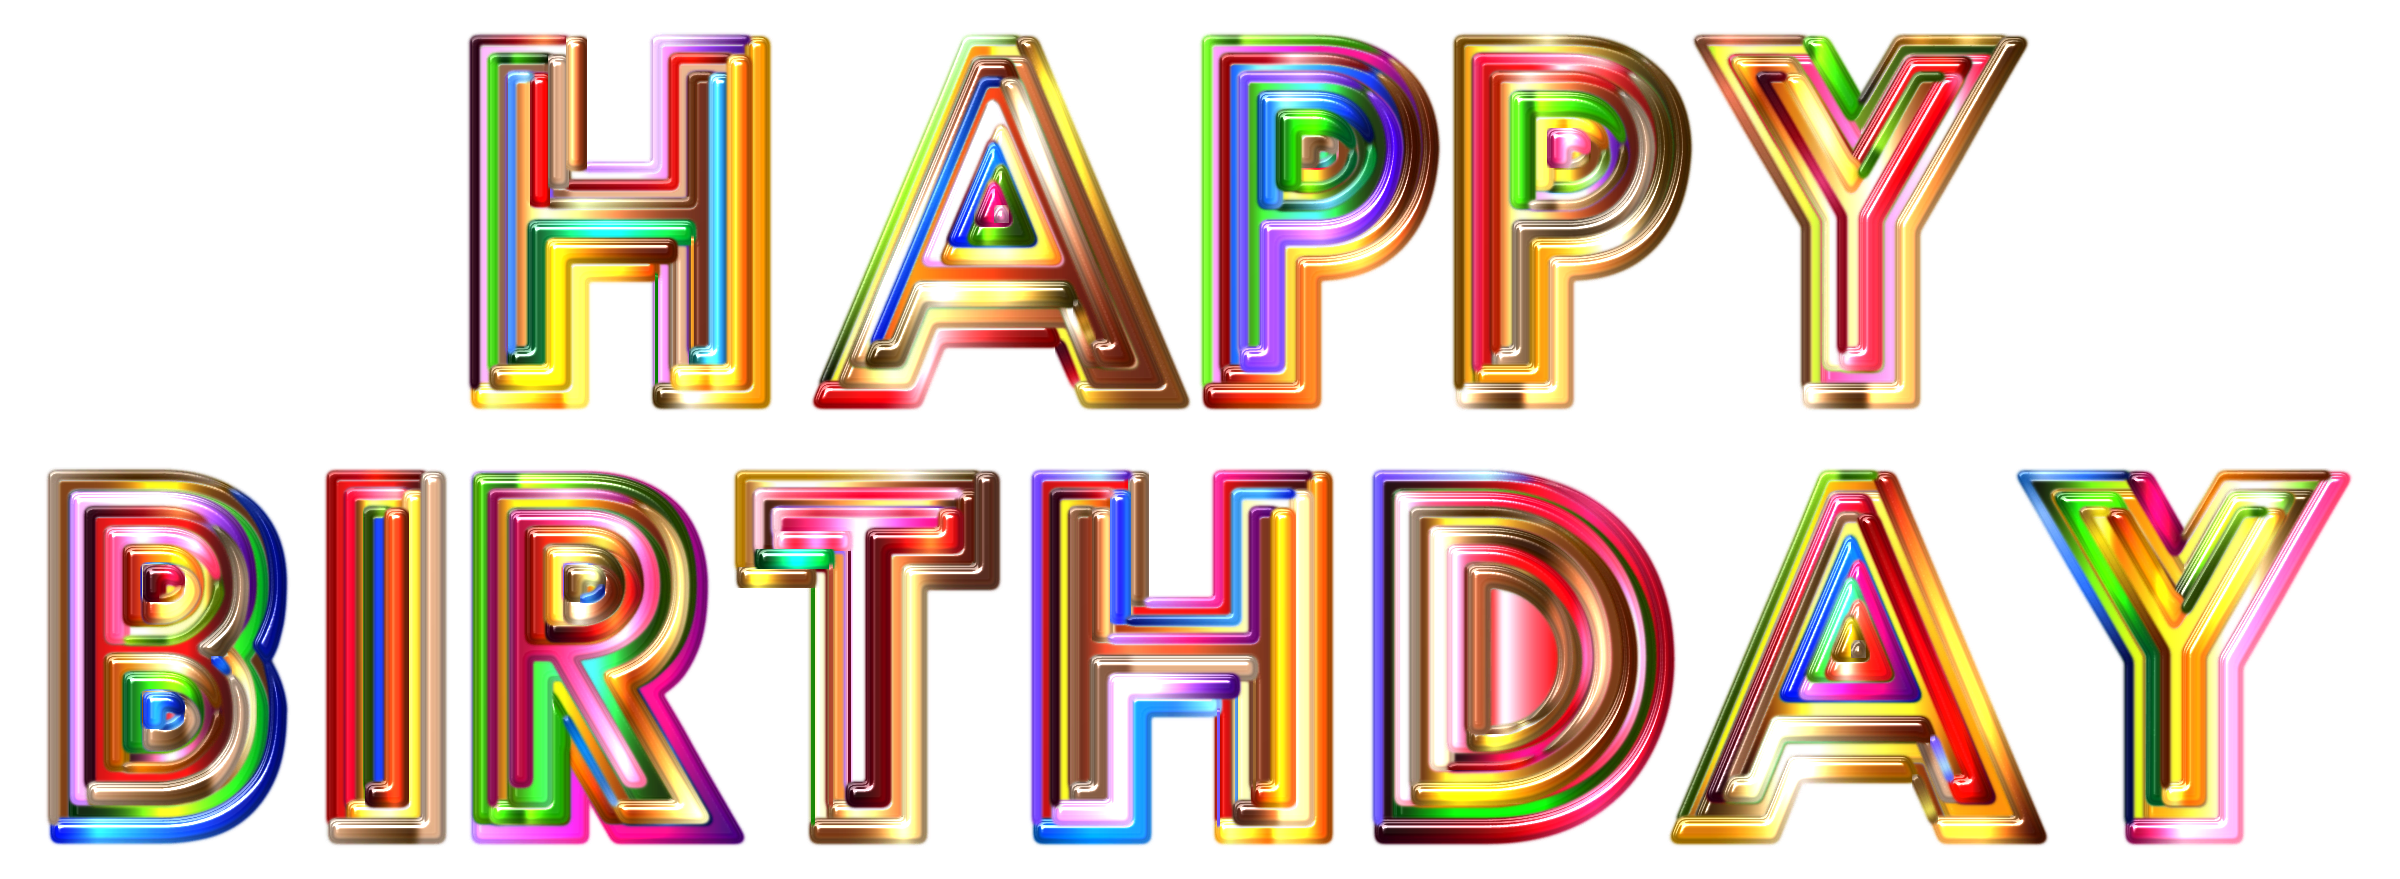 Happy Birthday PNG image free Download 